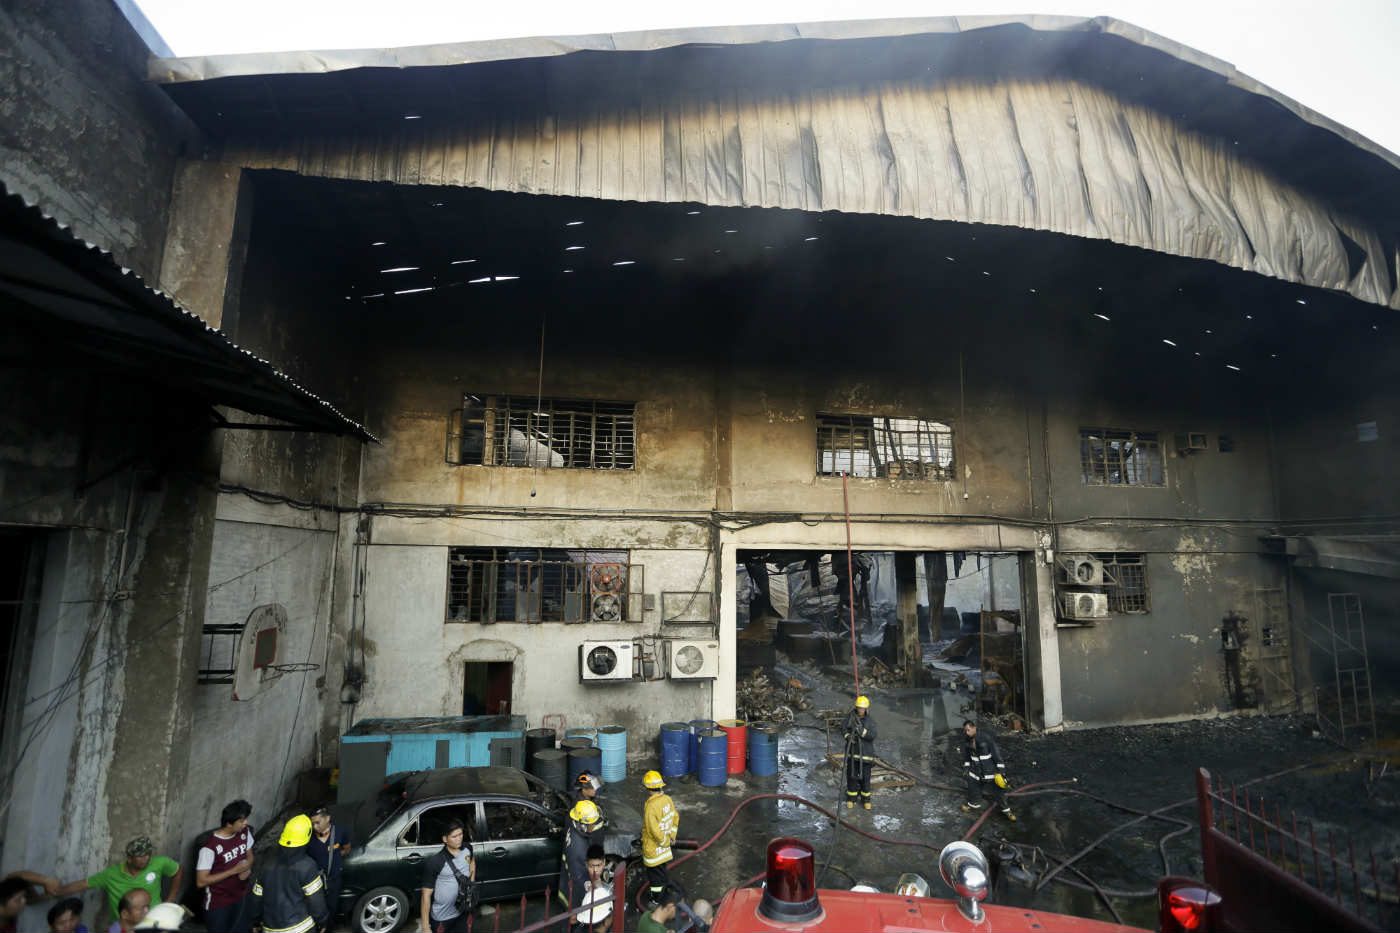 KENTEX FACTORY. A view of a burnt footwear factory following a fire in Valenzuela city, east of Manila, Philippines, 13 May 2015. Photo by Ritchie B. Tongo/EPA 